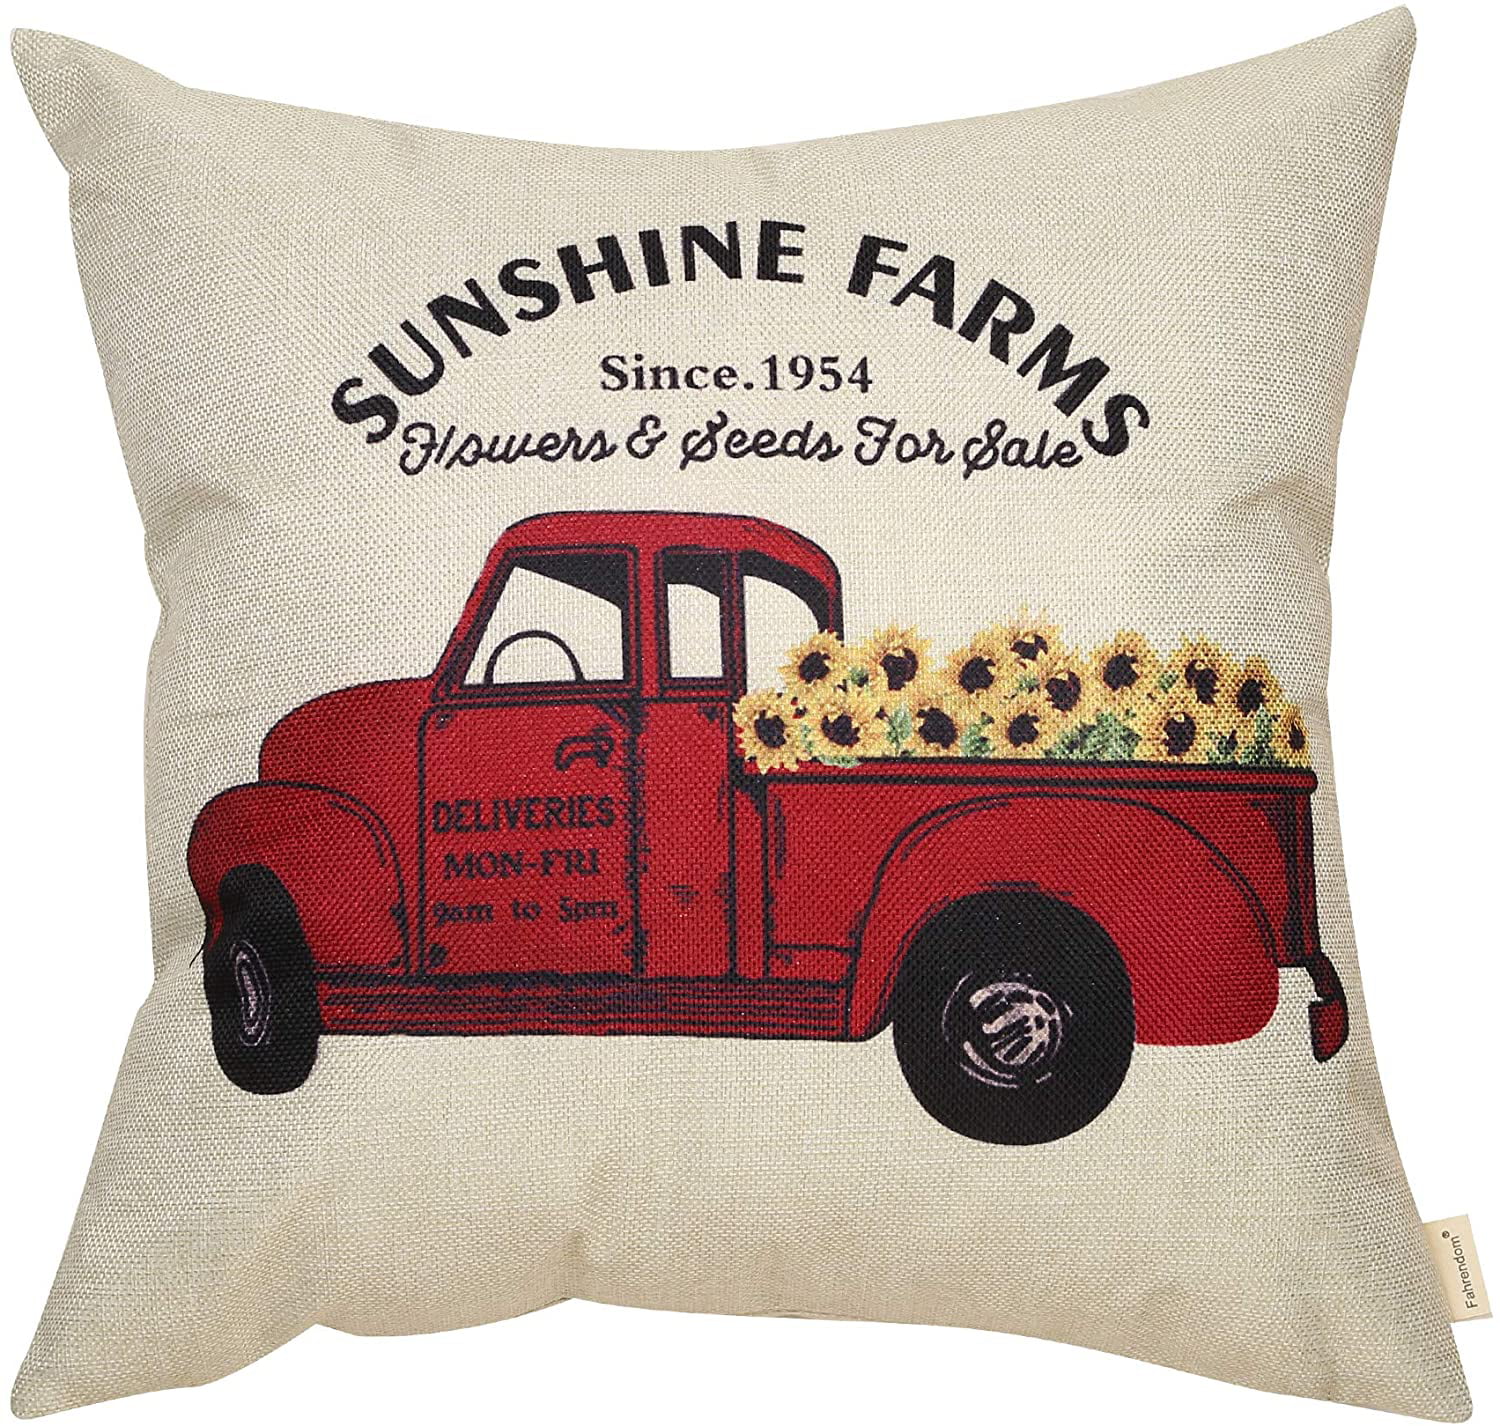 Home Farmhouse Decorations Cotton Linen Square Pillowcase Decor for Sofa Couch 18 x 18 Softxpp Spring Flower Truck Decorative Throw Pillow Cover Yellow Buffalo Plaid Check Tulips Sign Cushion Case